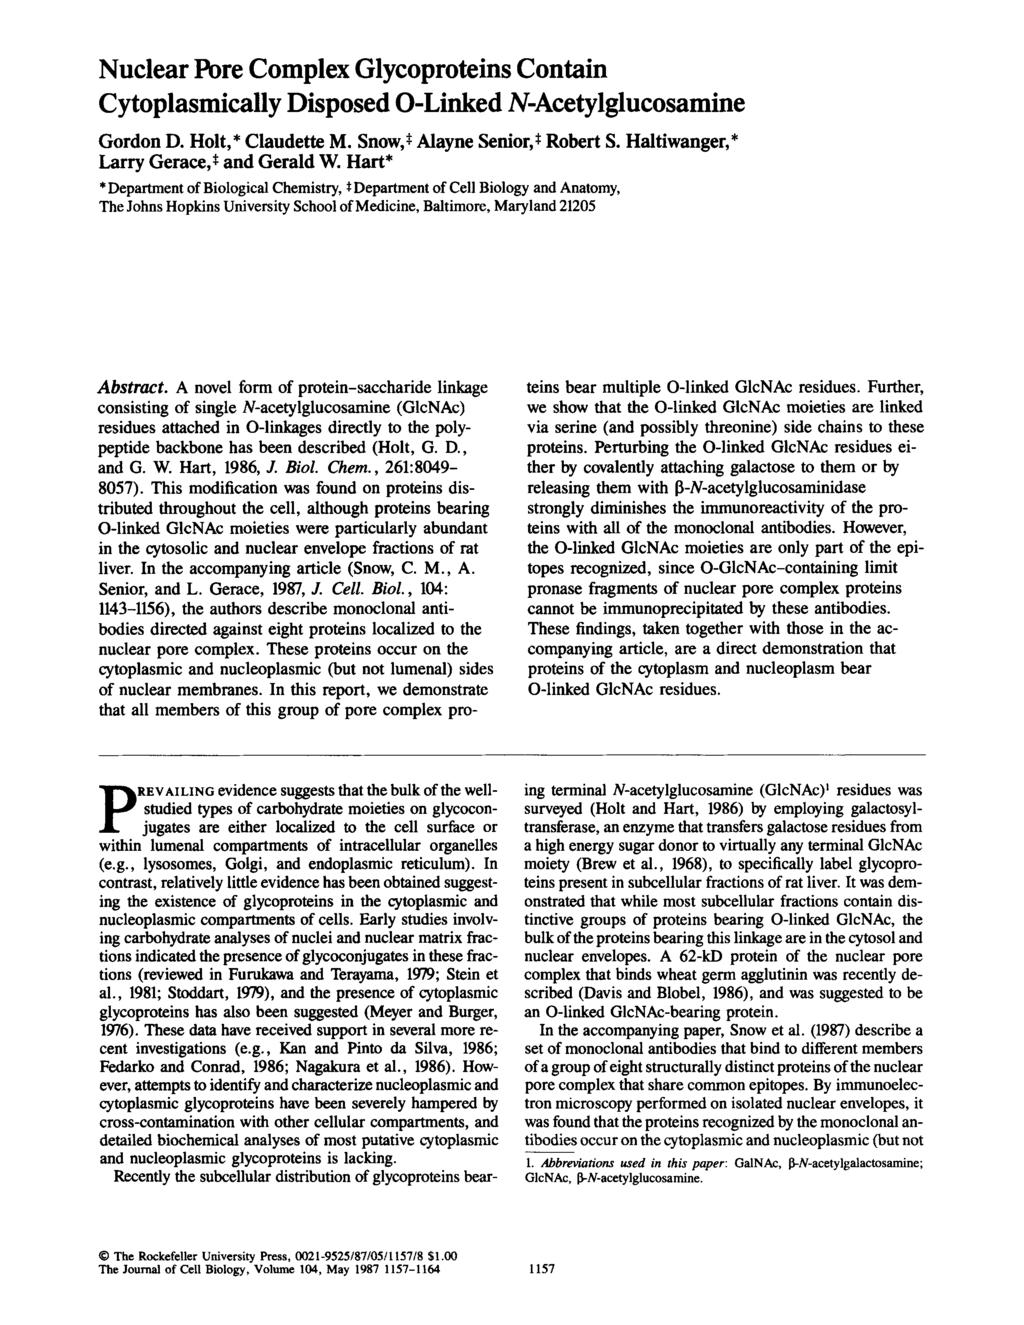 Published Online: 1 May, 1987 Supp Info: http://doi.org/10.1083/jcb.104.5.1157 Downloaded from jcb.rupress.